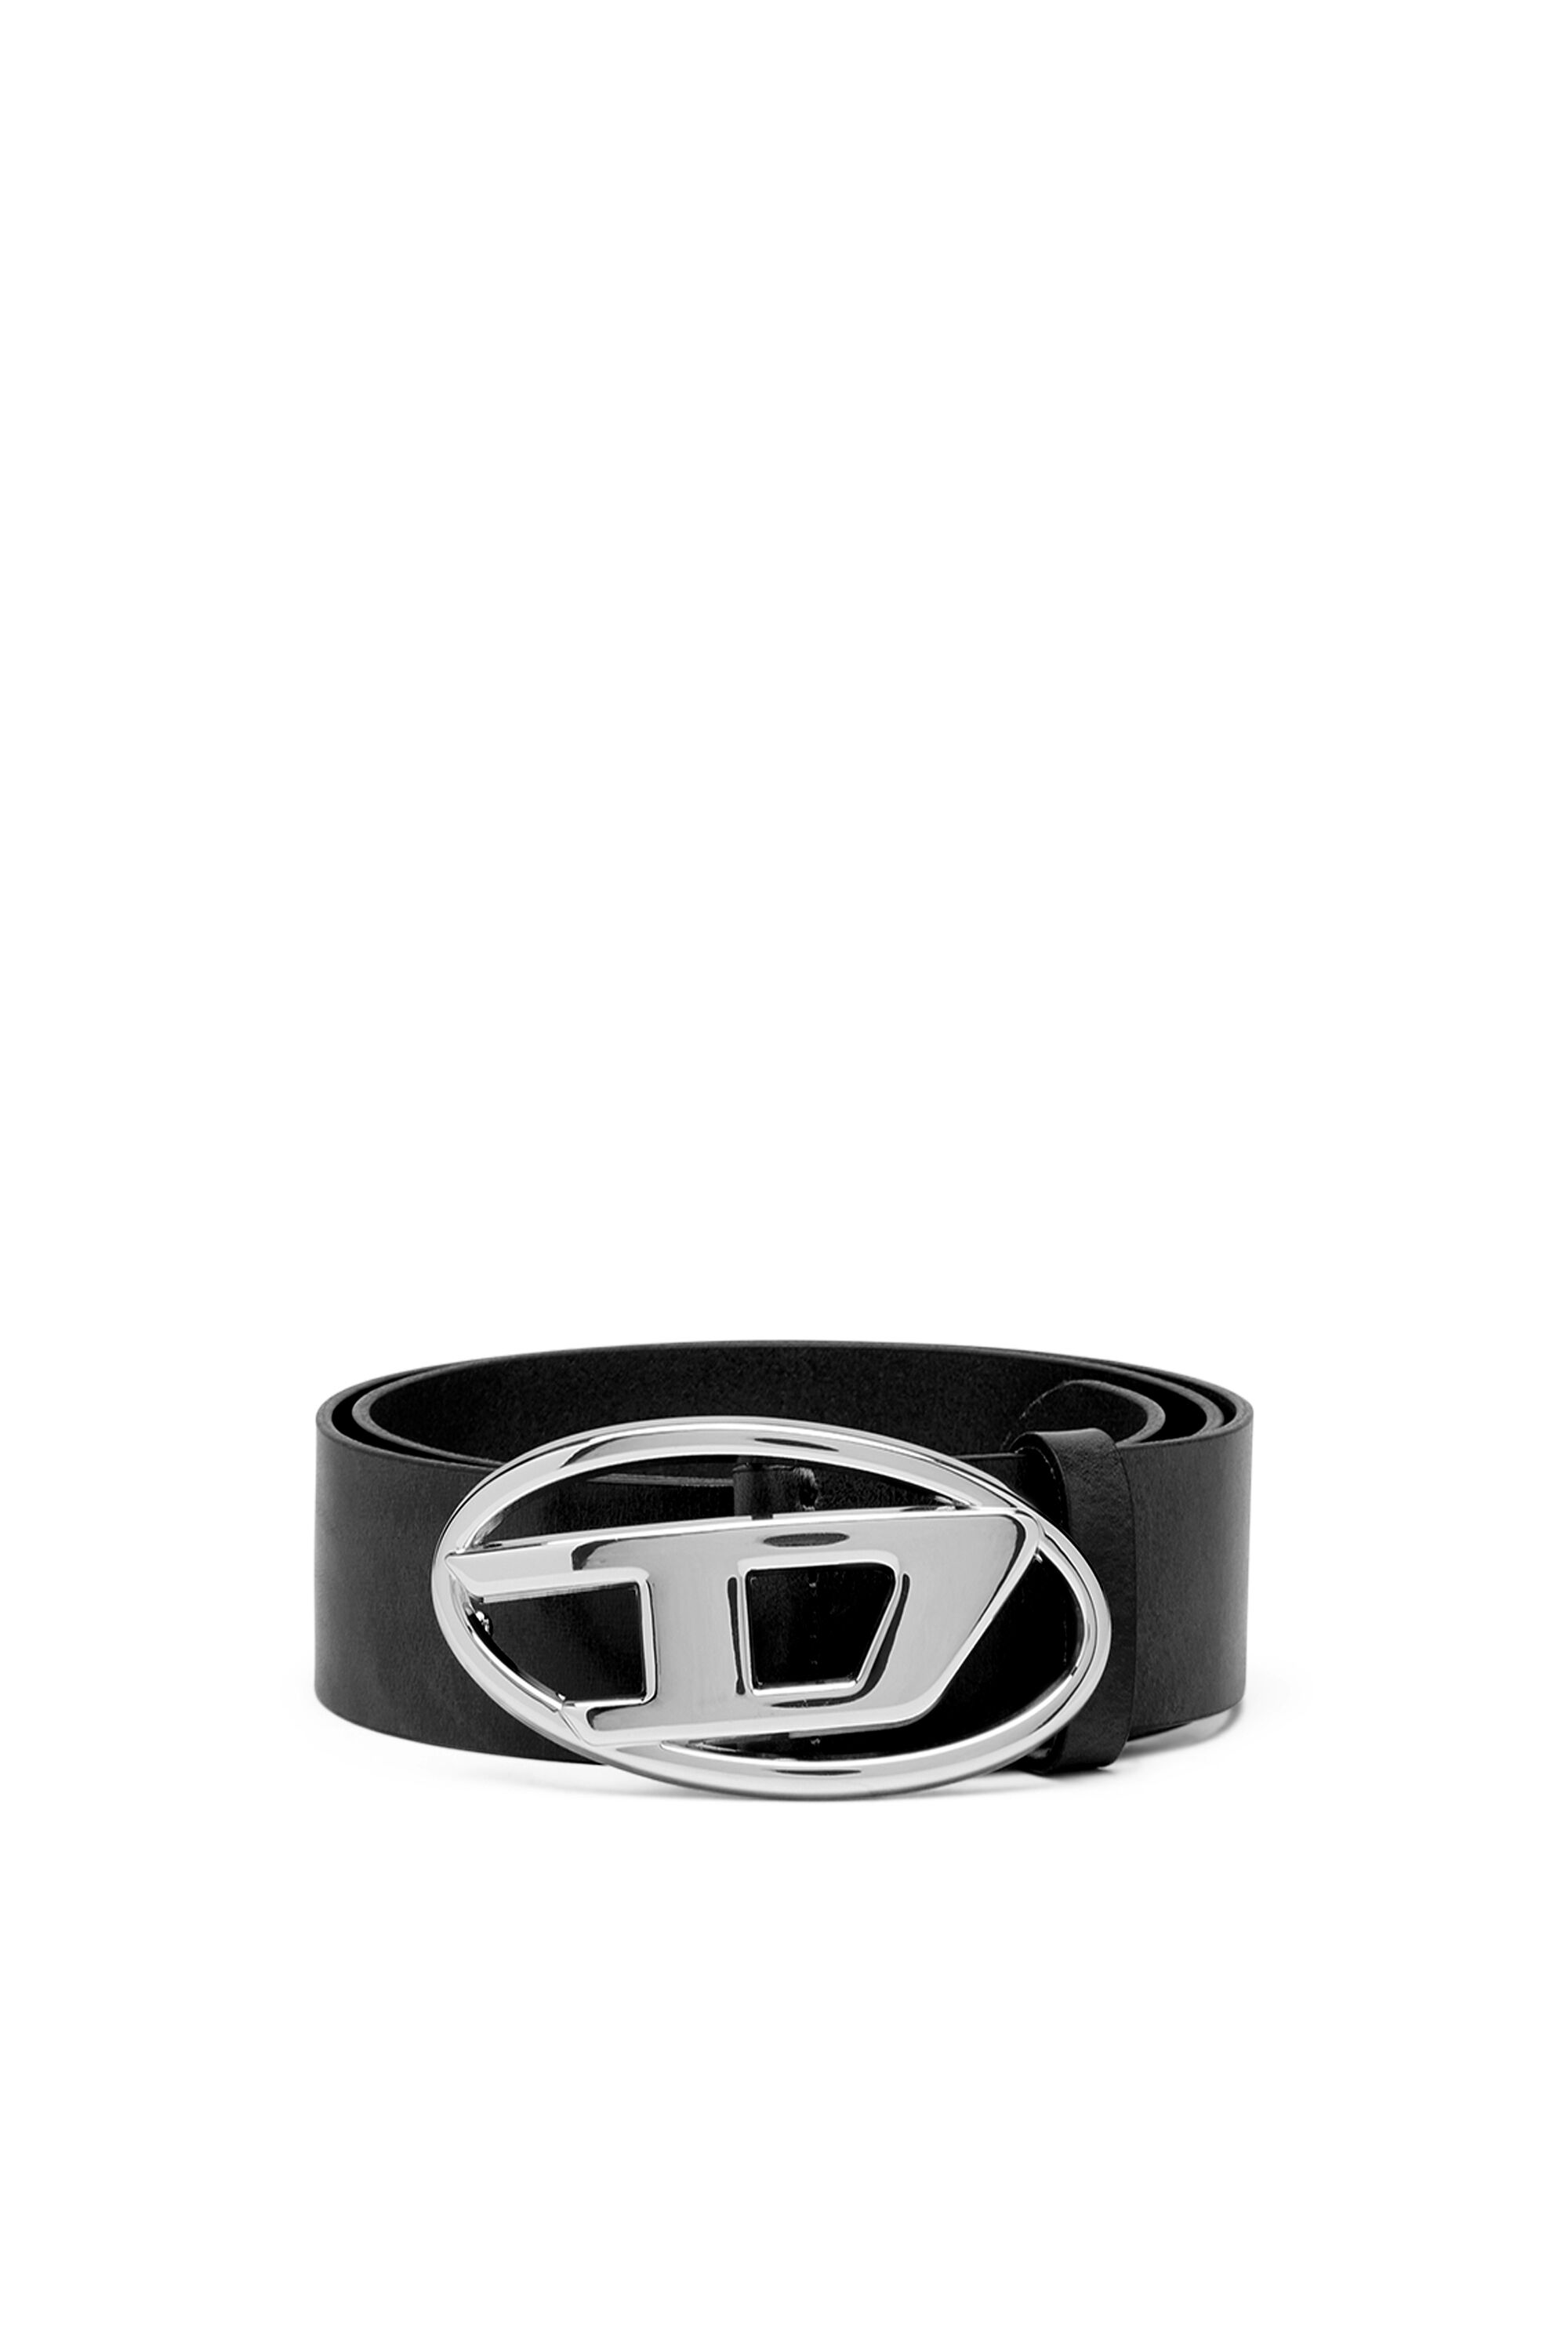 B-1DR Woman: leather Belt with silver D logo buckle | Diesel